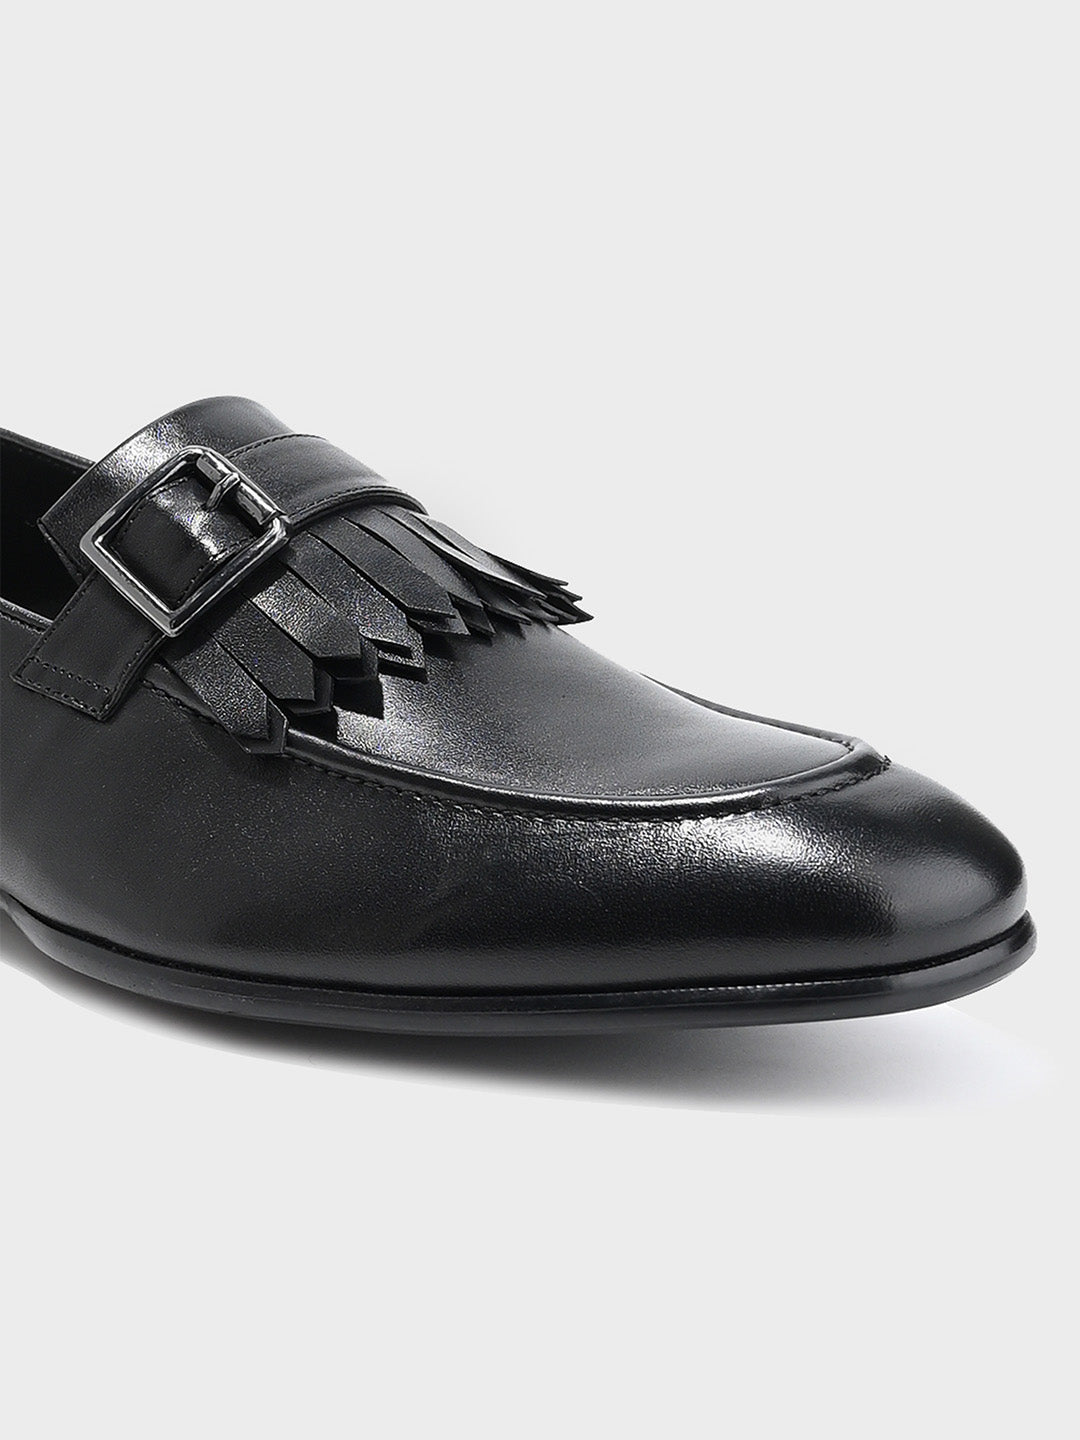 Classic Black Leather Men's Slip-On Loafer Shoes